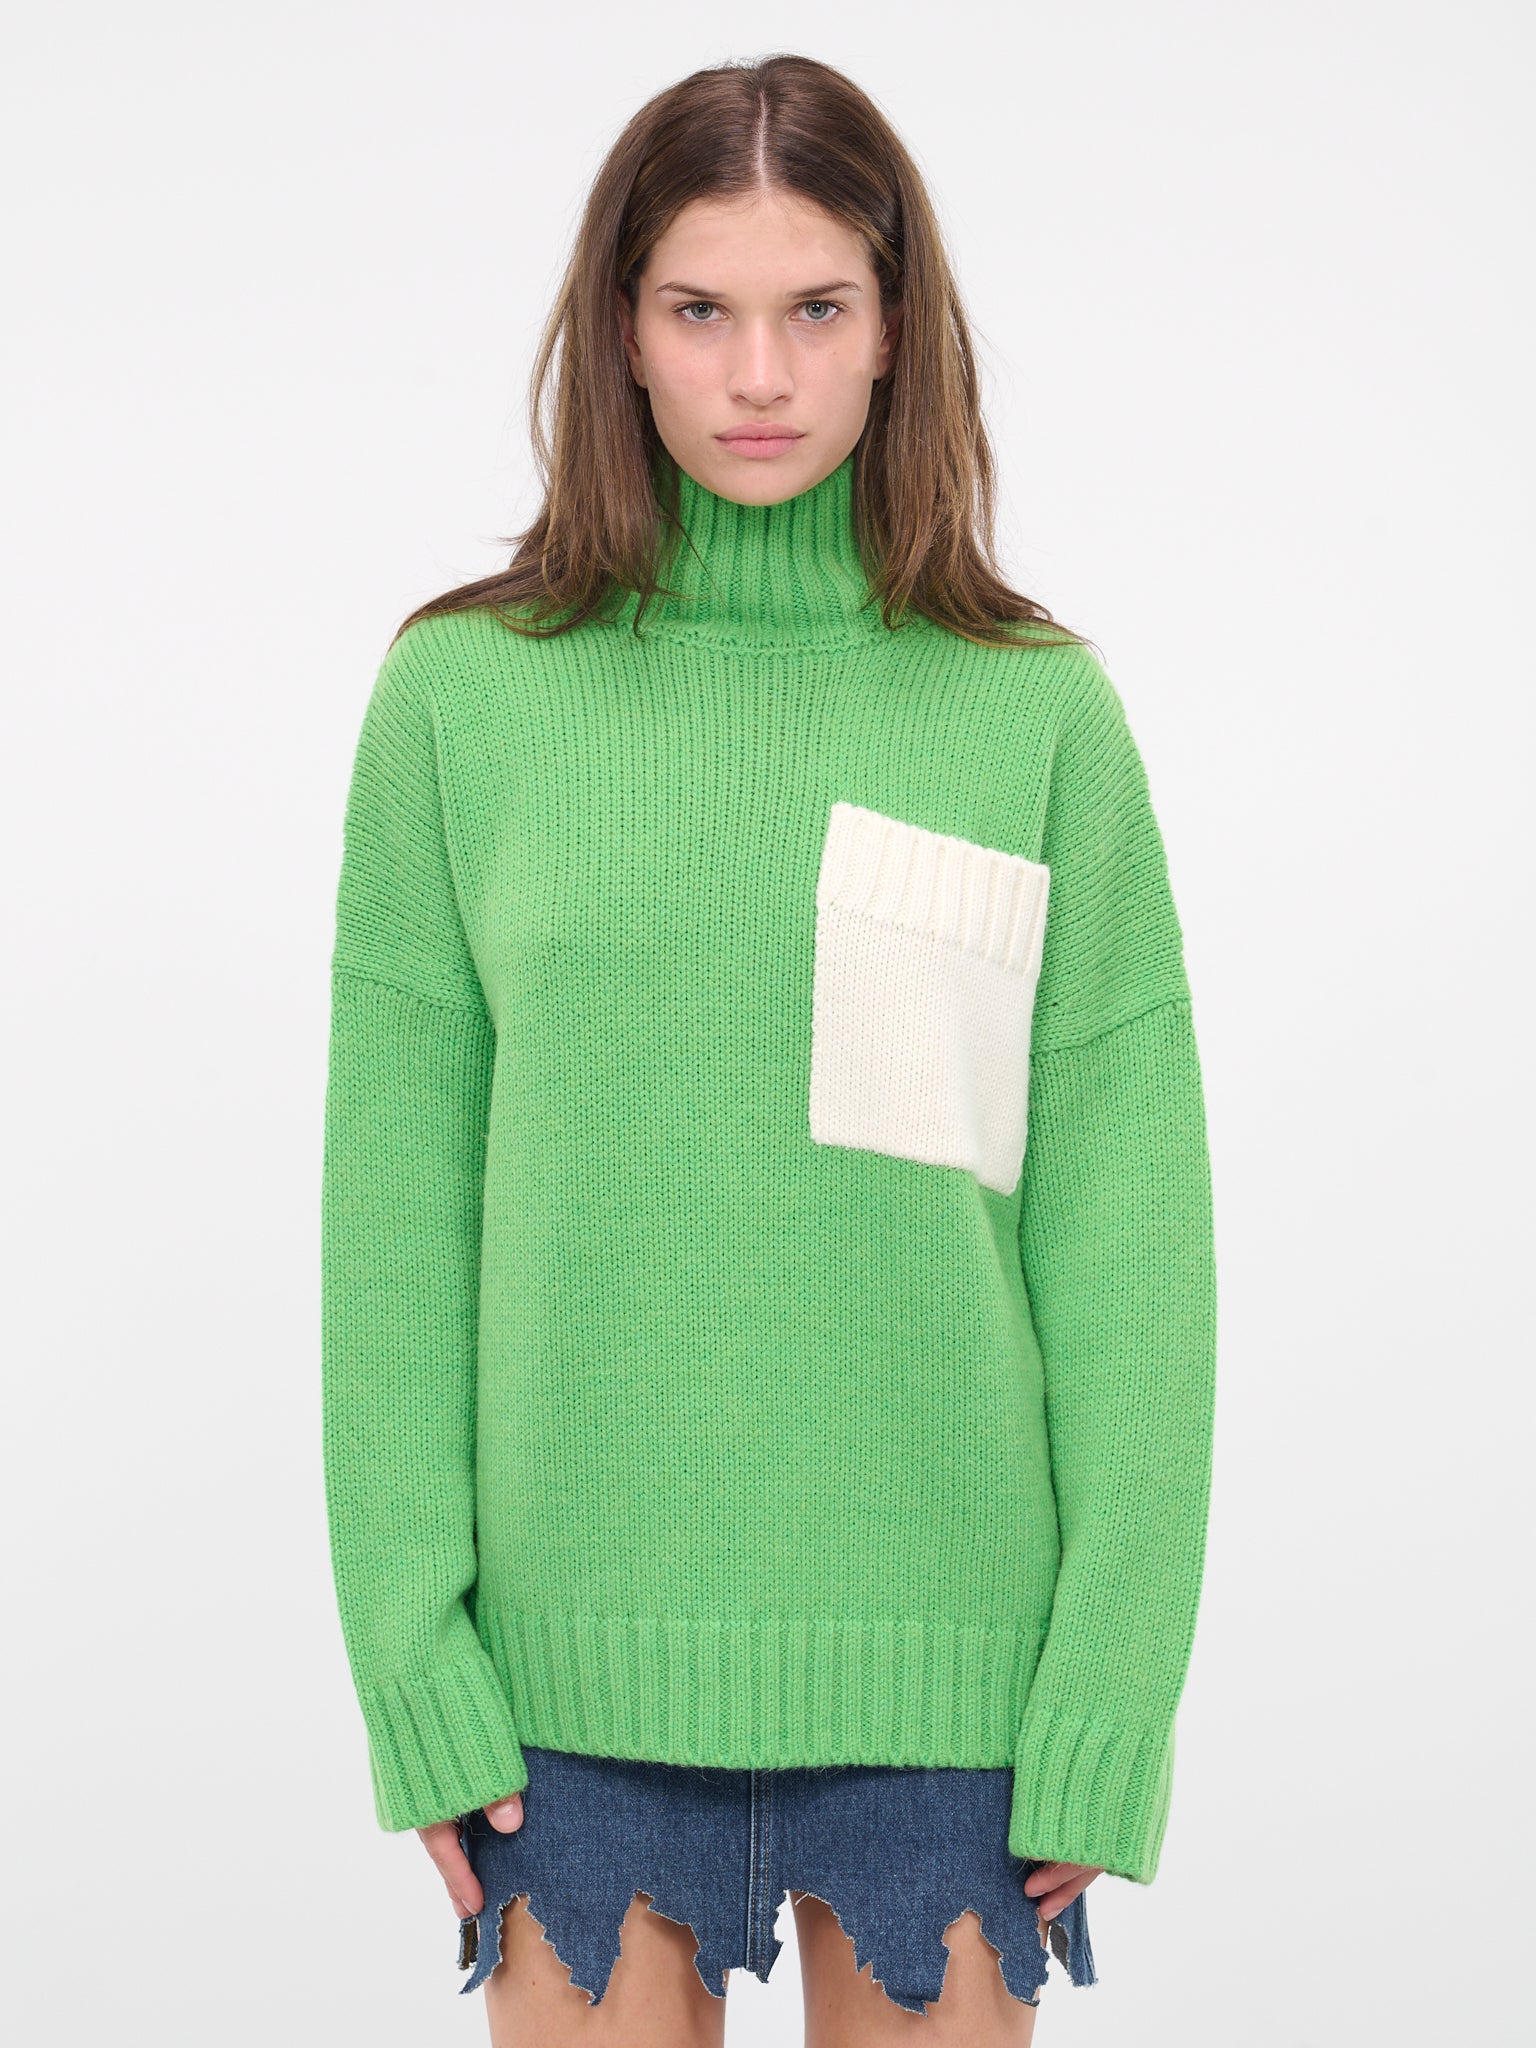 Patched Pocket Knit Jumper (KW0508-497-BRIGHT-GREEN)